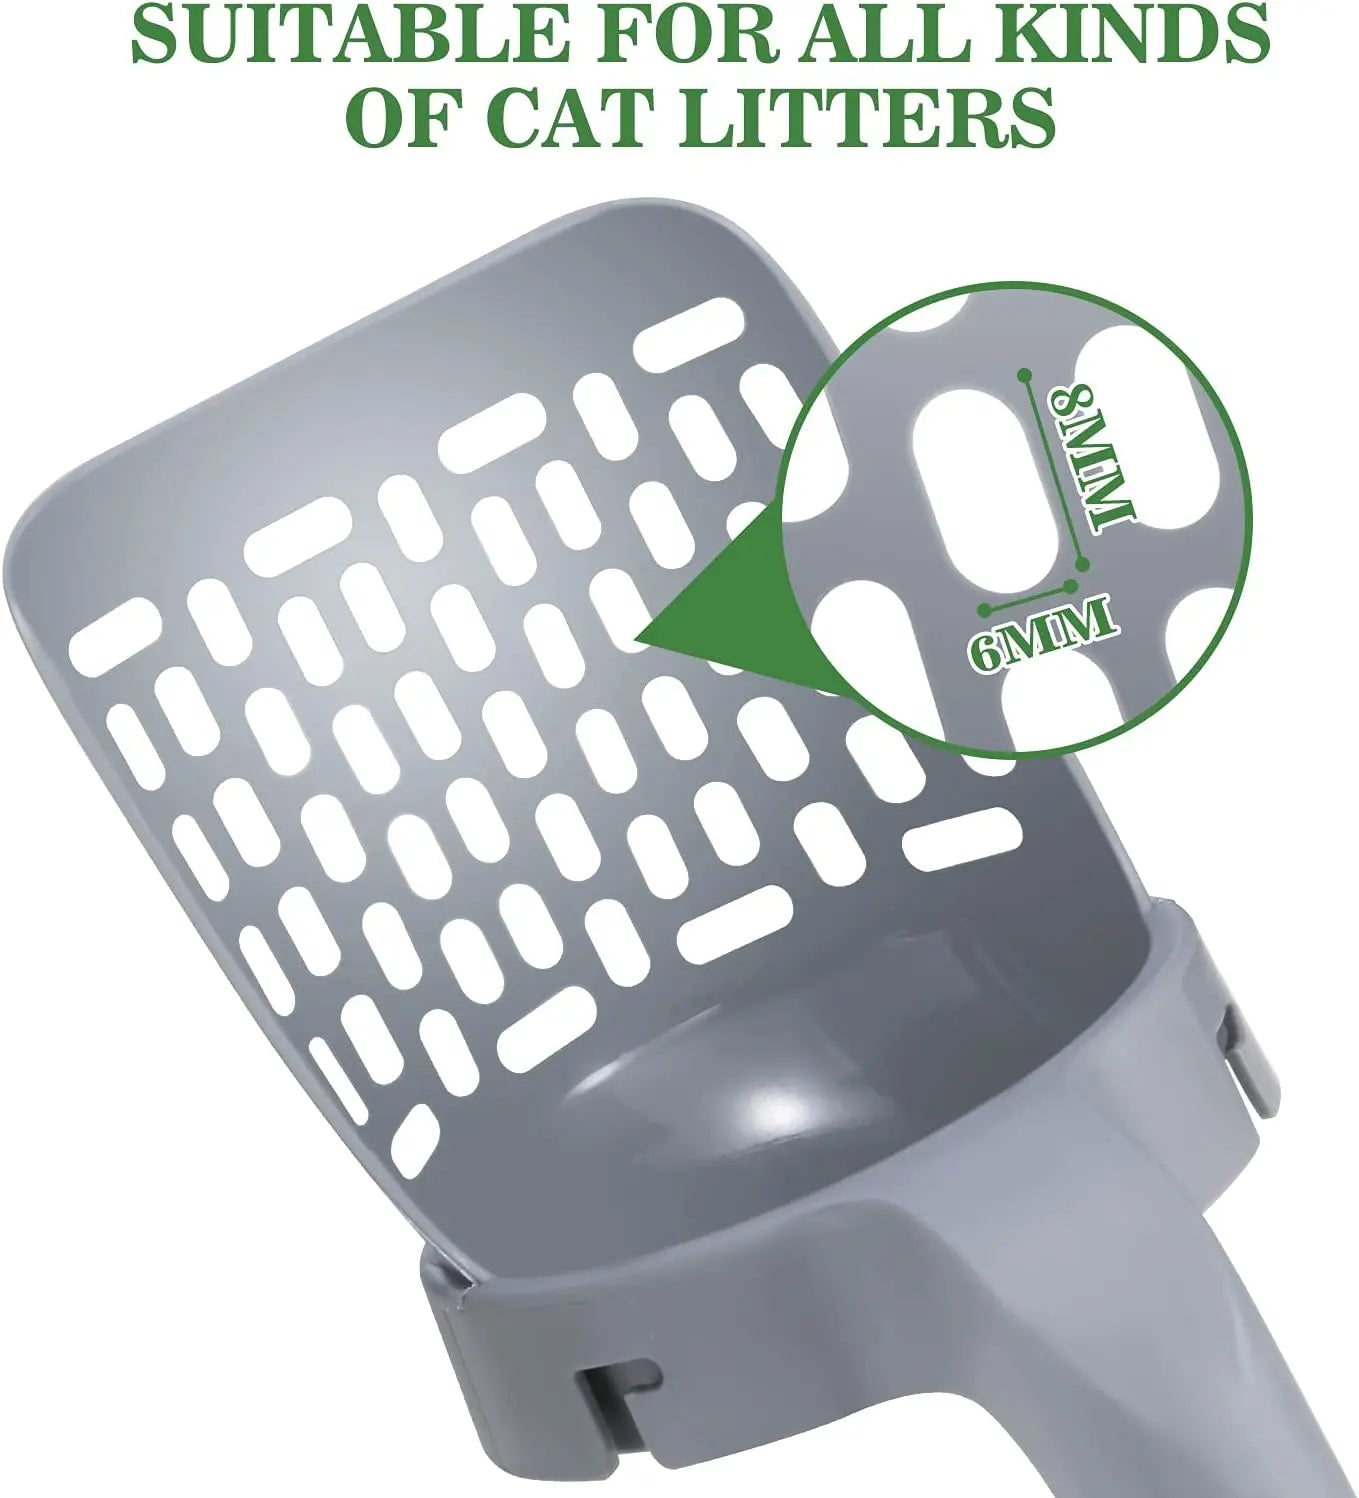 Self-Cleaning Cat Litter Shovel - Happy2Cats